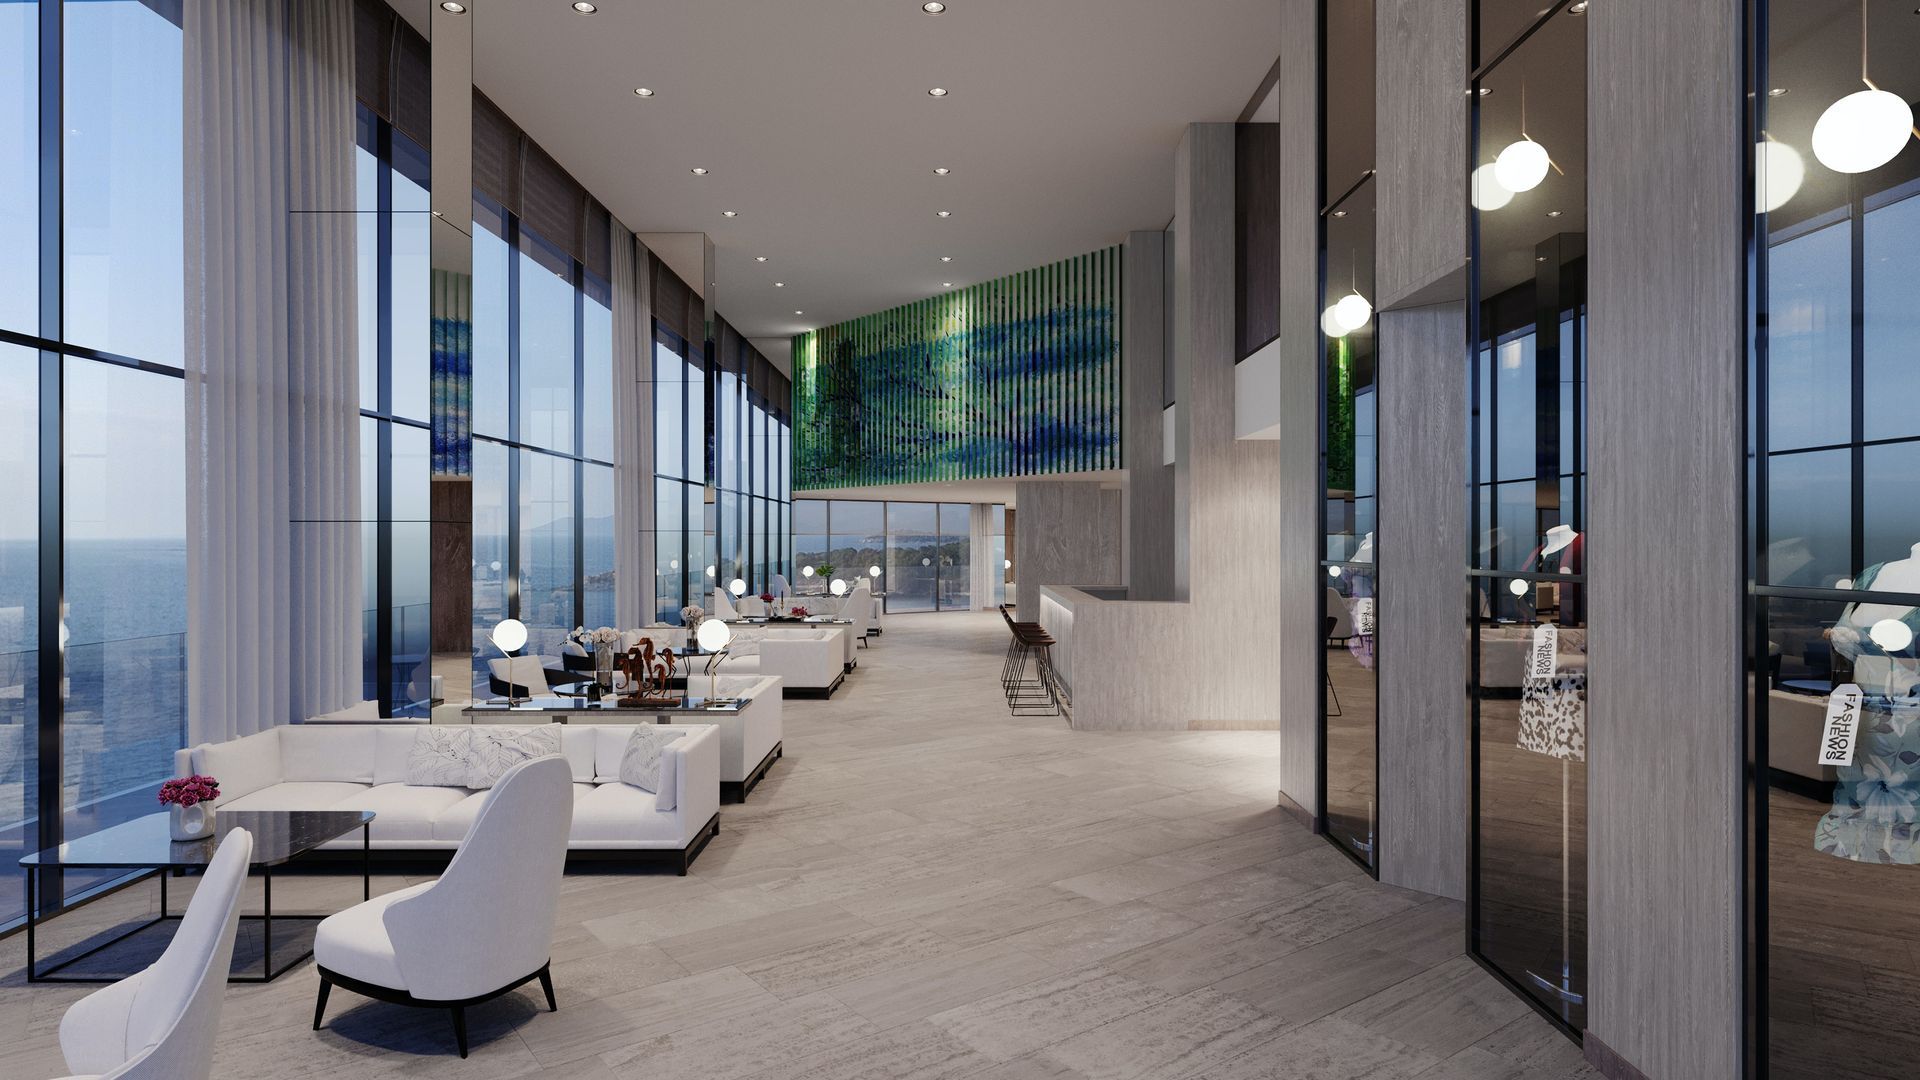 Natural light filtering into an upscale hotel through architectural glass features.